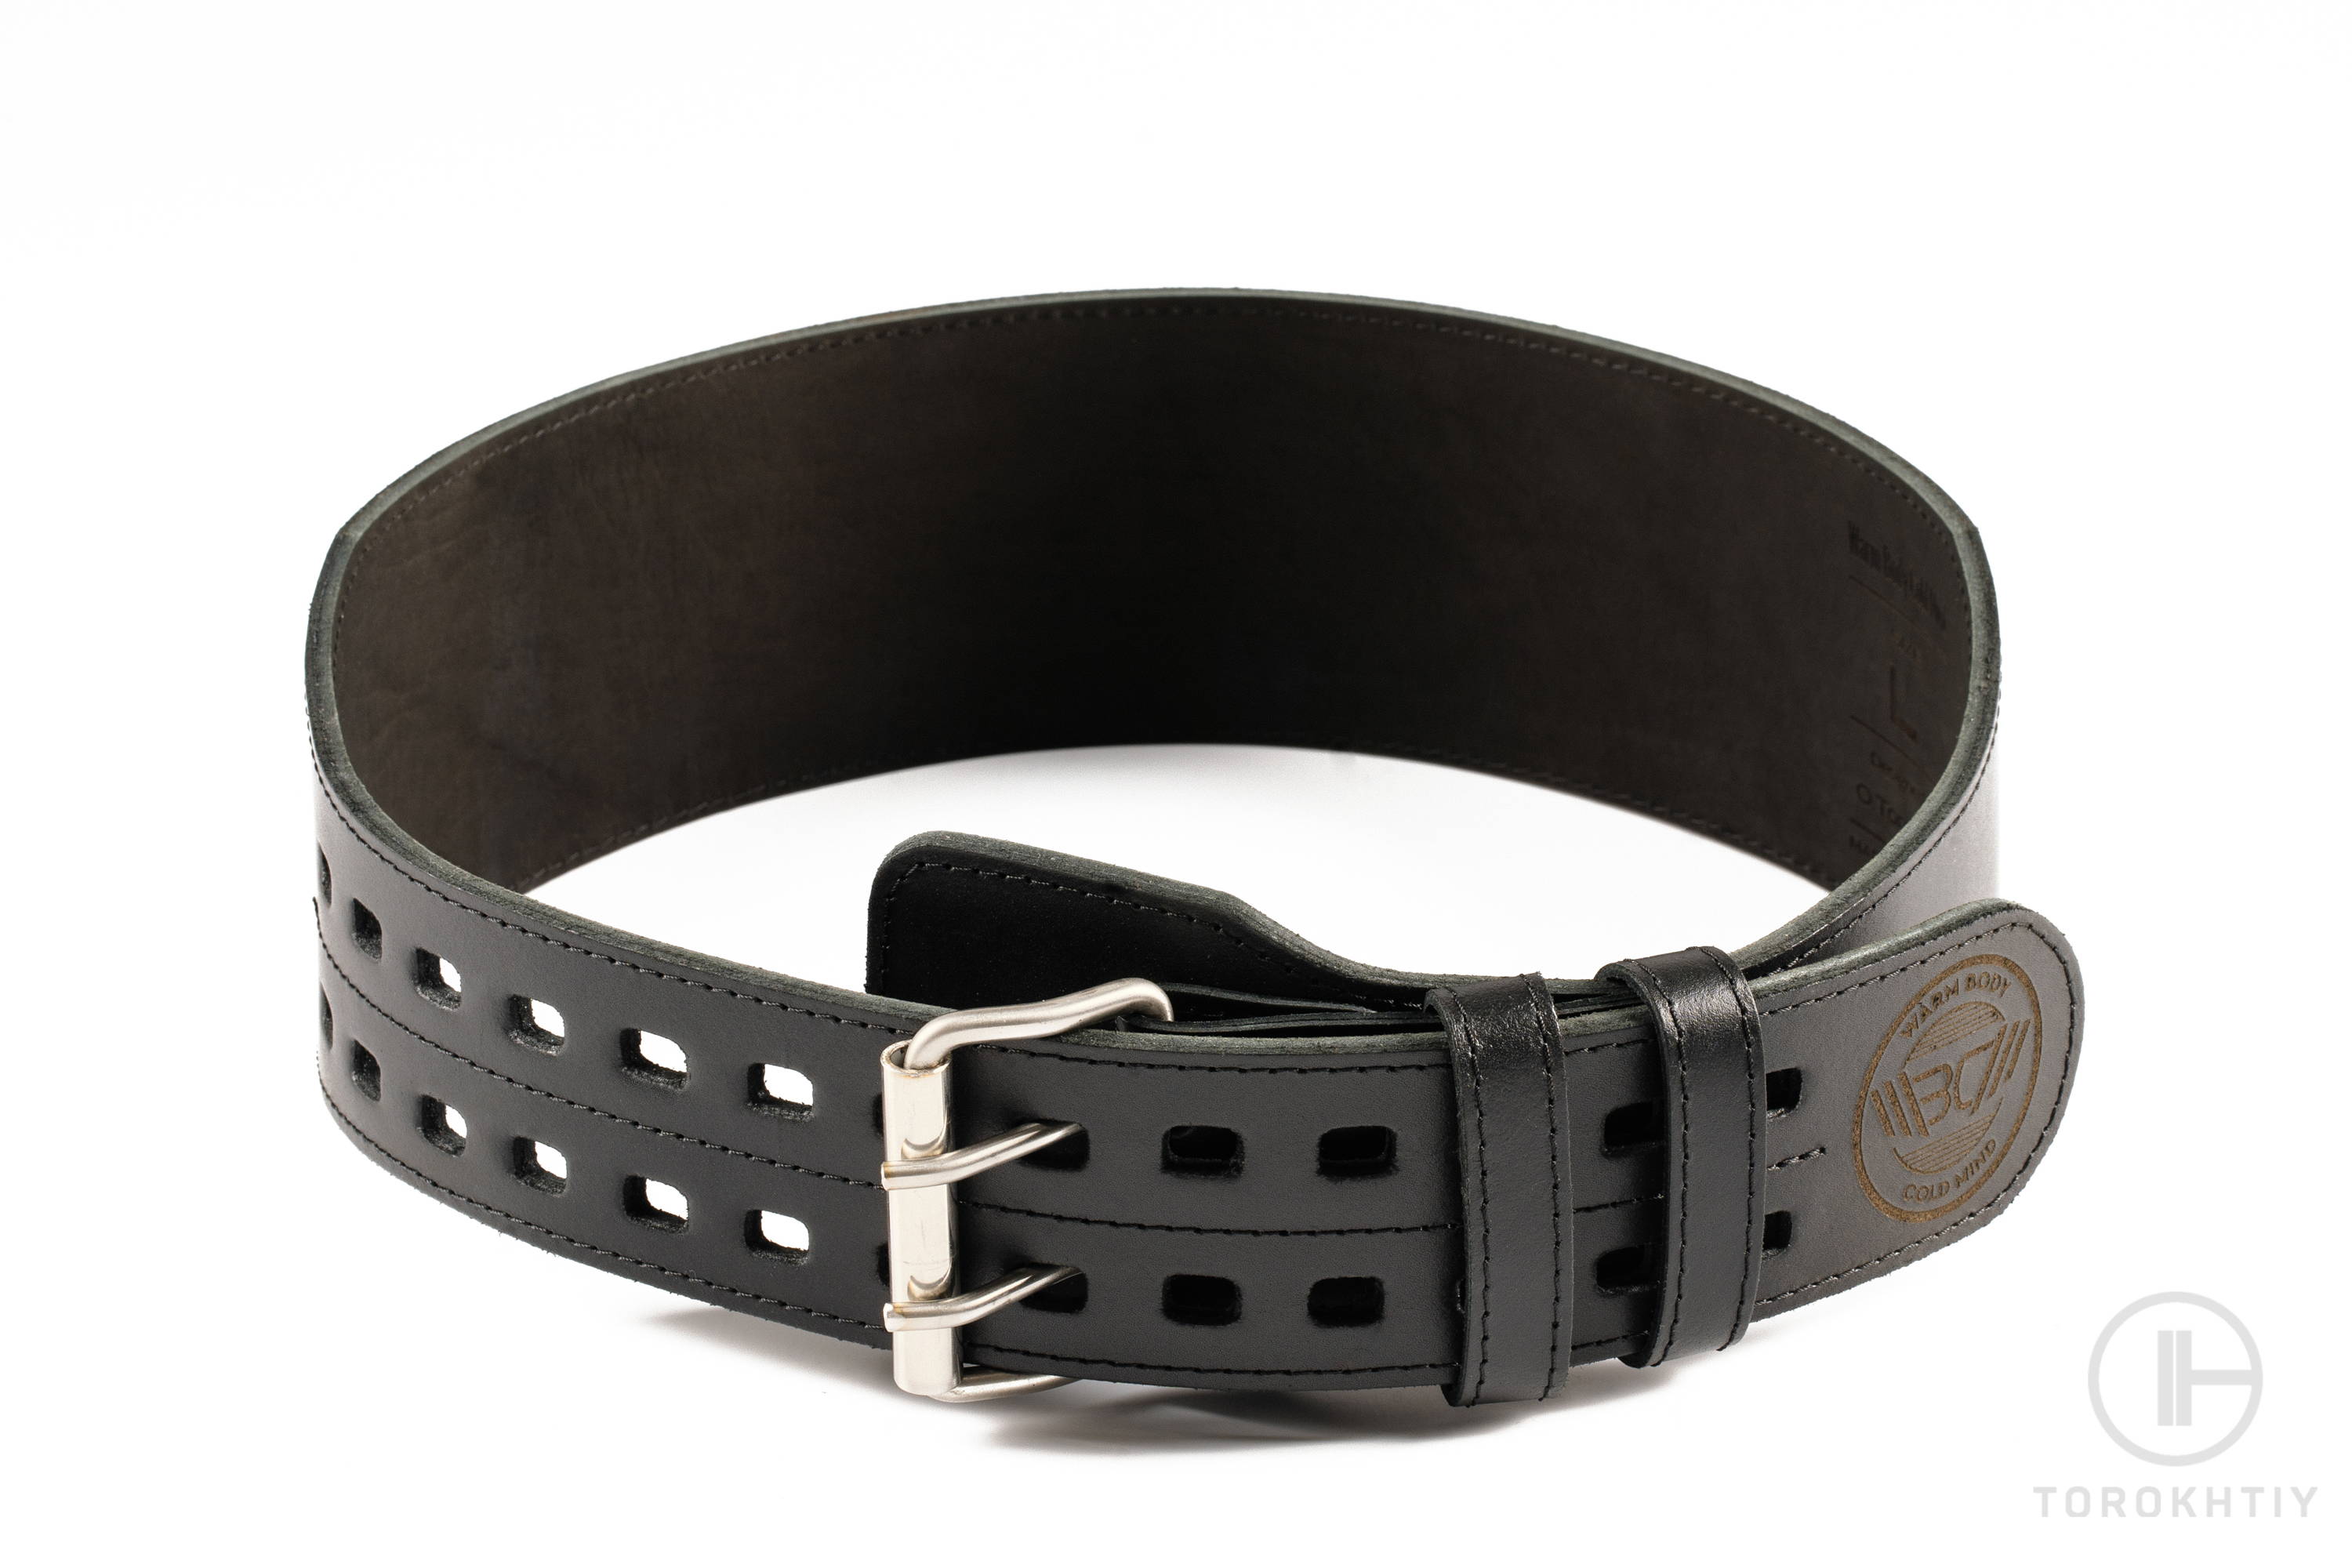 Leather Weight Lifting Belt by WBCM